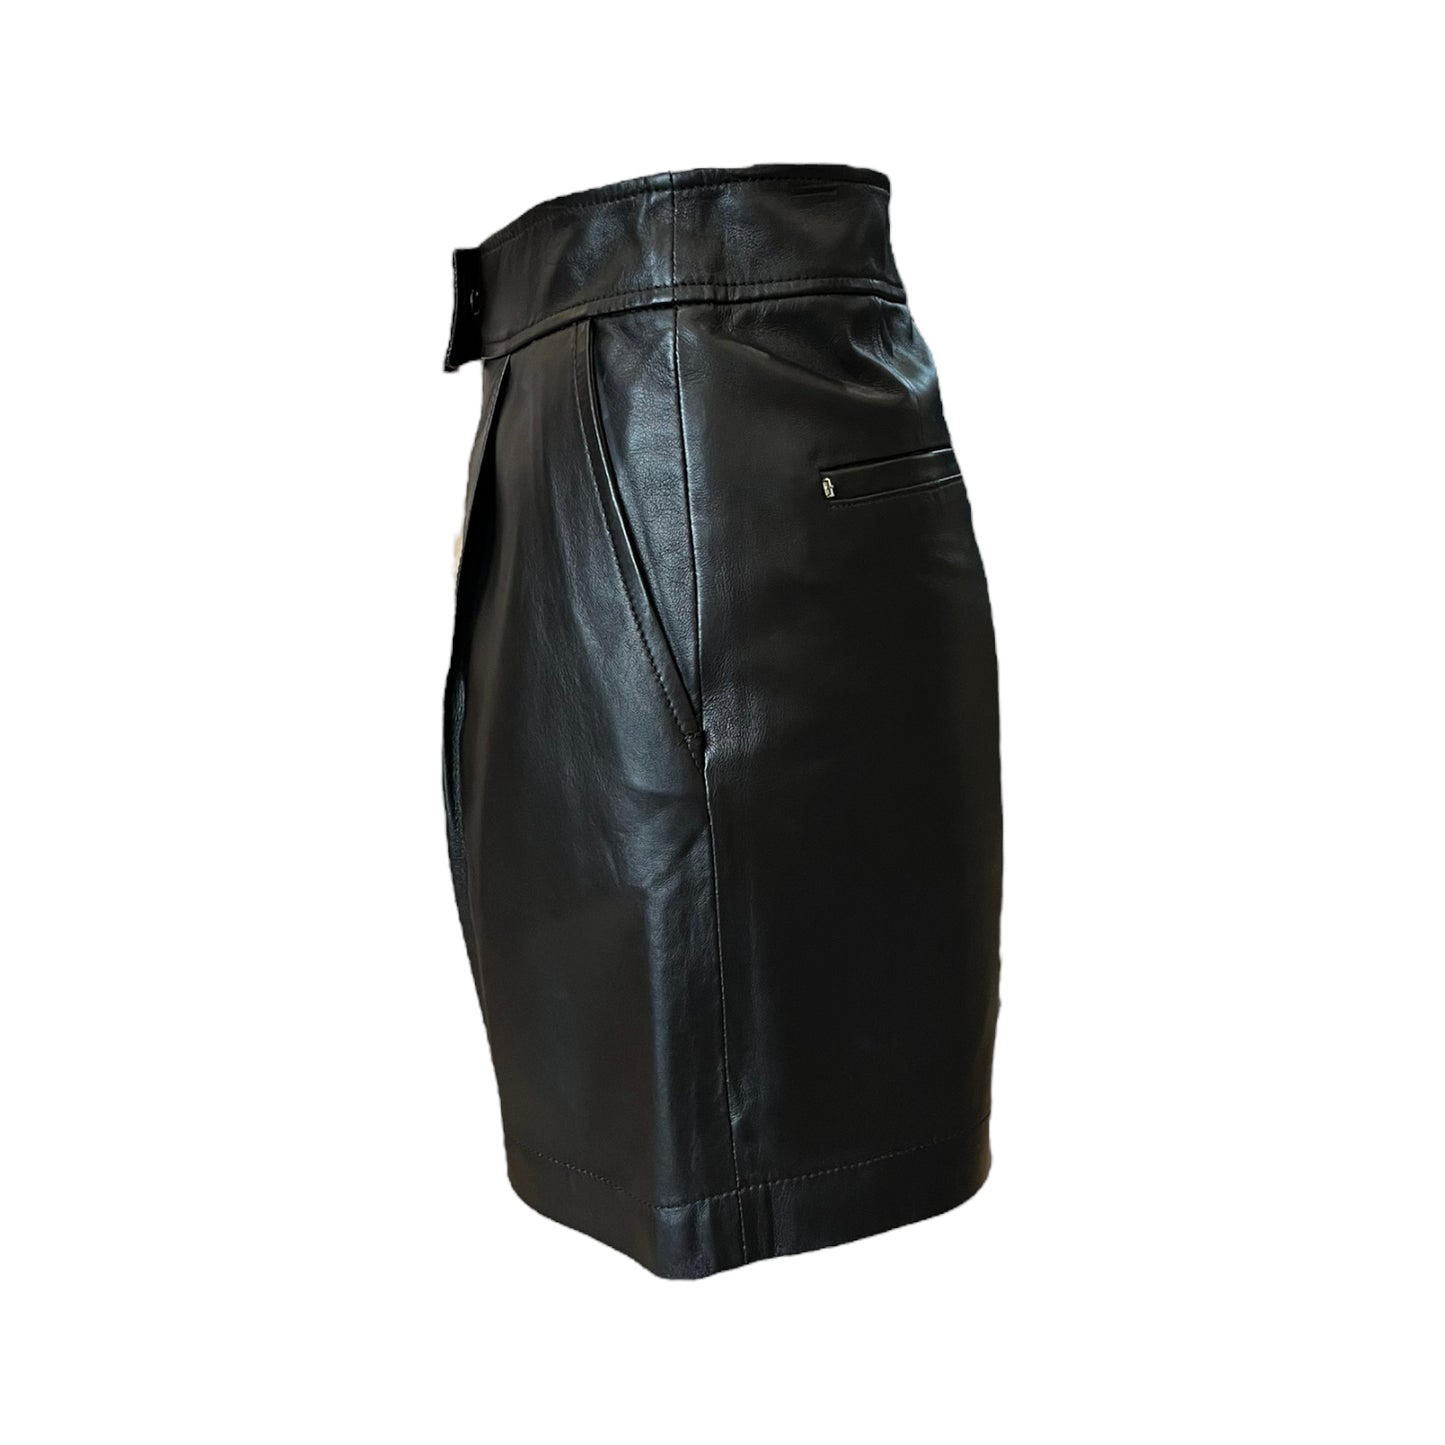 NEW Sports Max Black Leather Shorts